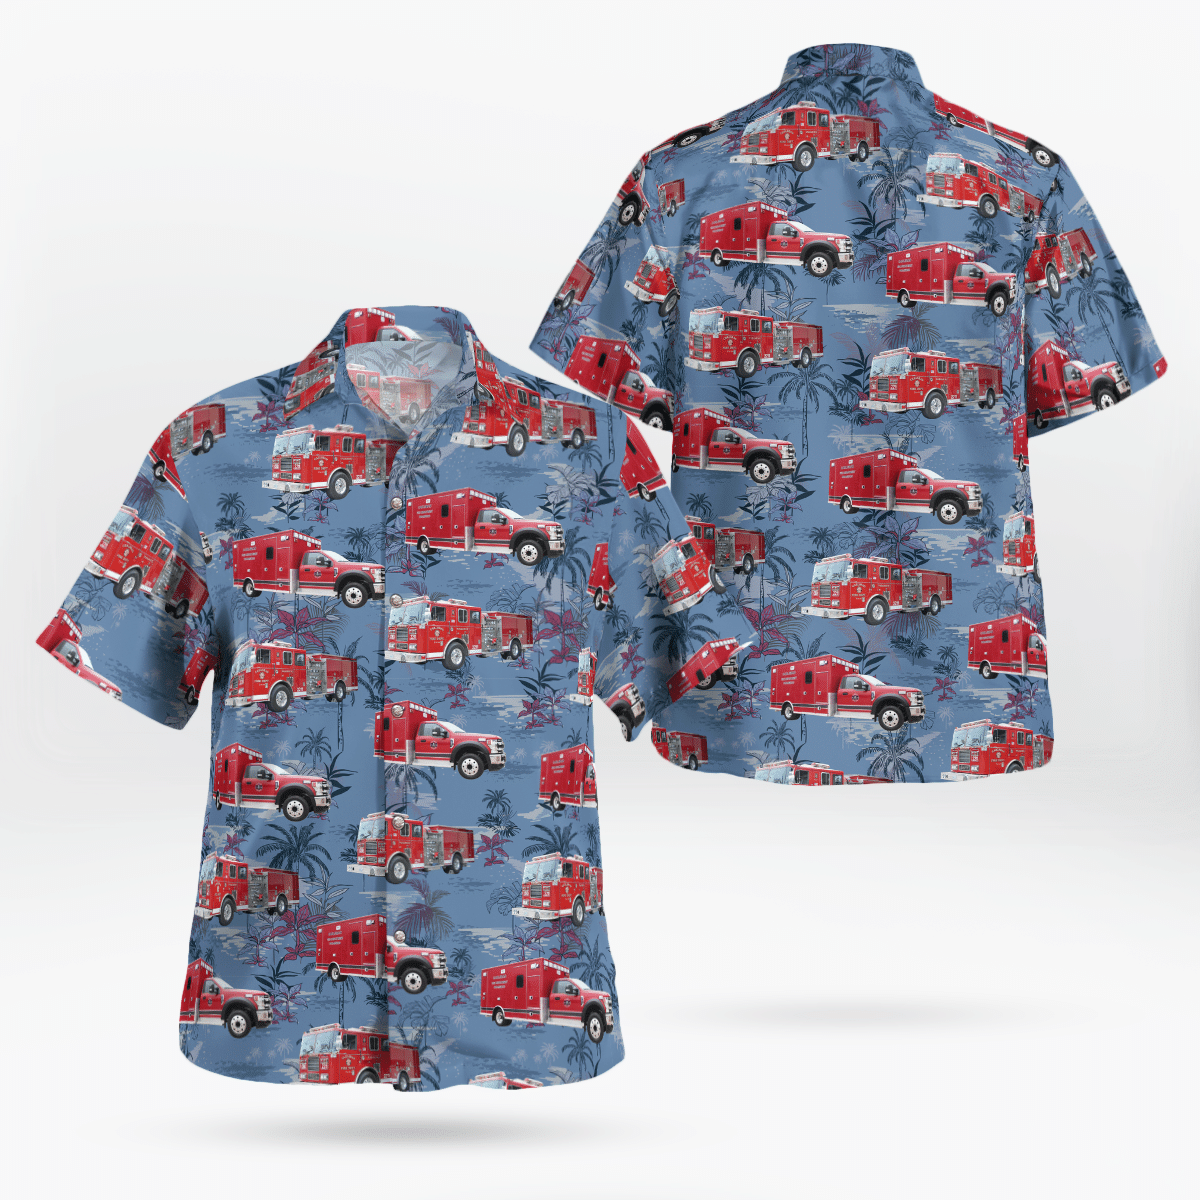 If you are in need of a new summertime look, pick up this Hawaiian shirt 38